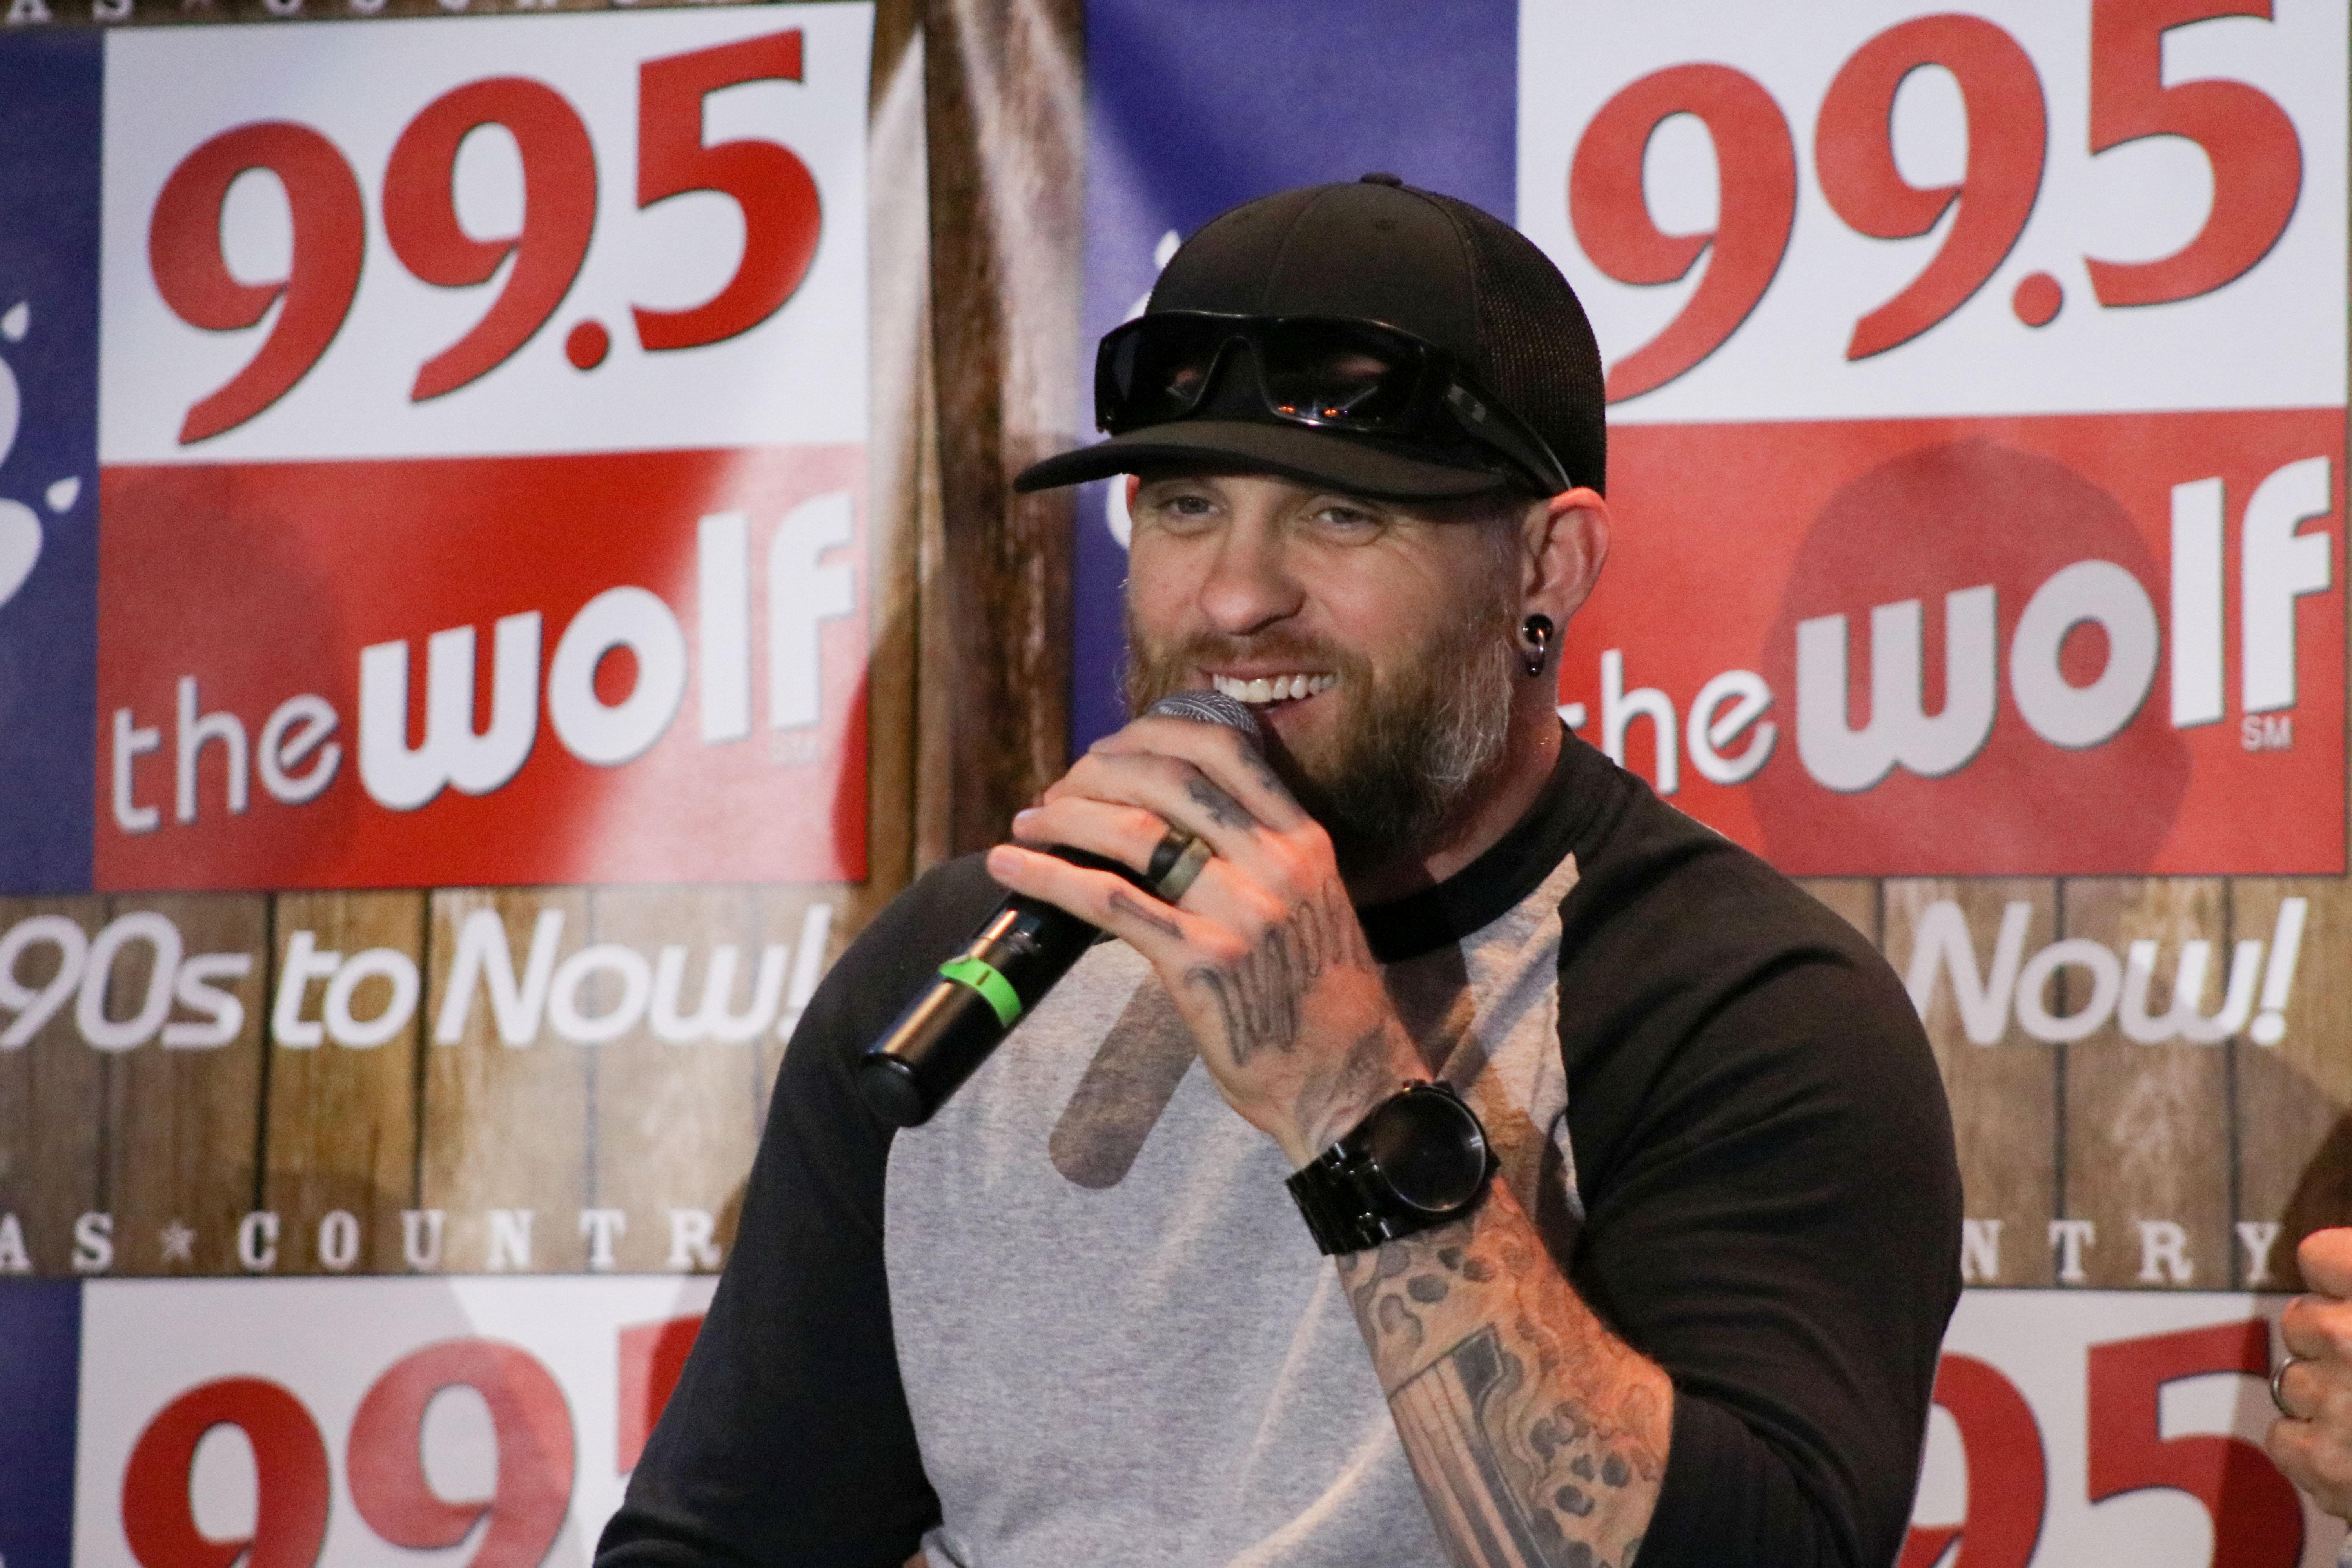 99.5 The Wolf VIP Experience with Brantley Gilbert